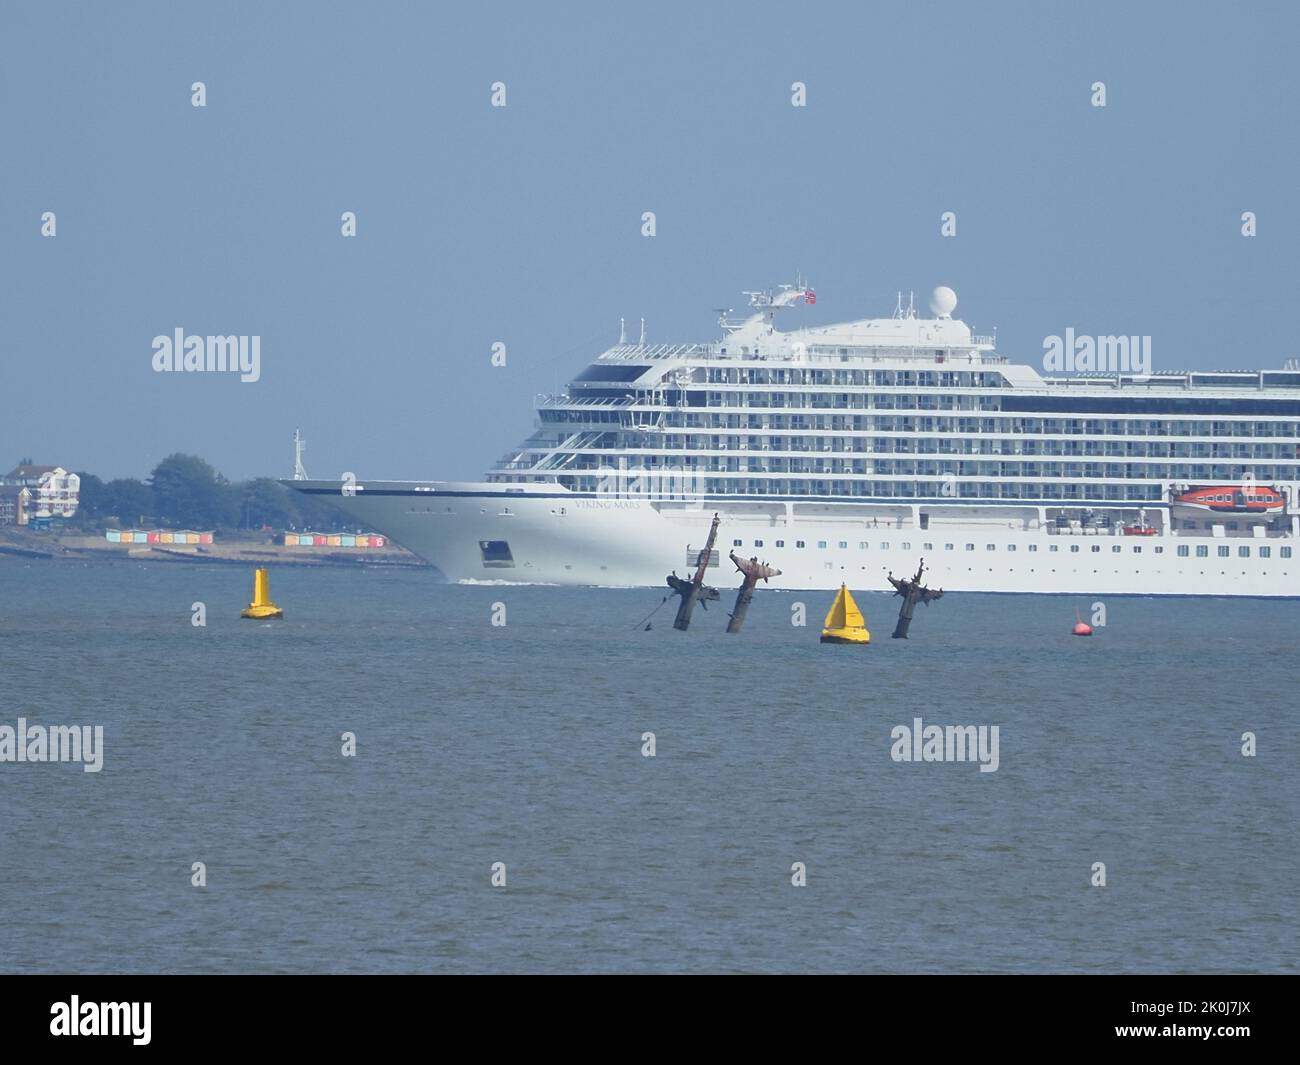 Sheerness, Kent, UK. 12th Sep, 2022. The Viking Mars cruise ship seen passing Sheerness, Kent this morning. Pictured passing shipwreck SS Richard Montgomery. Credit: James Bell/Alamy Live News Stock Photo